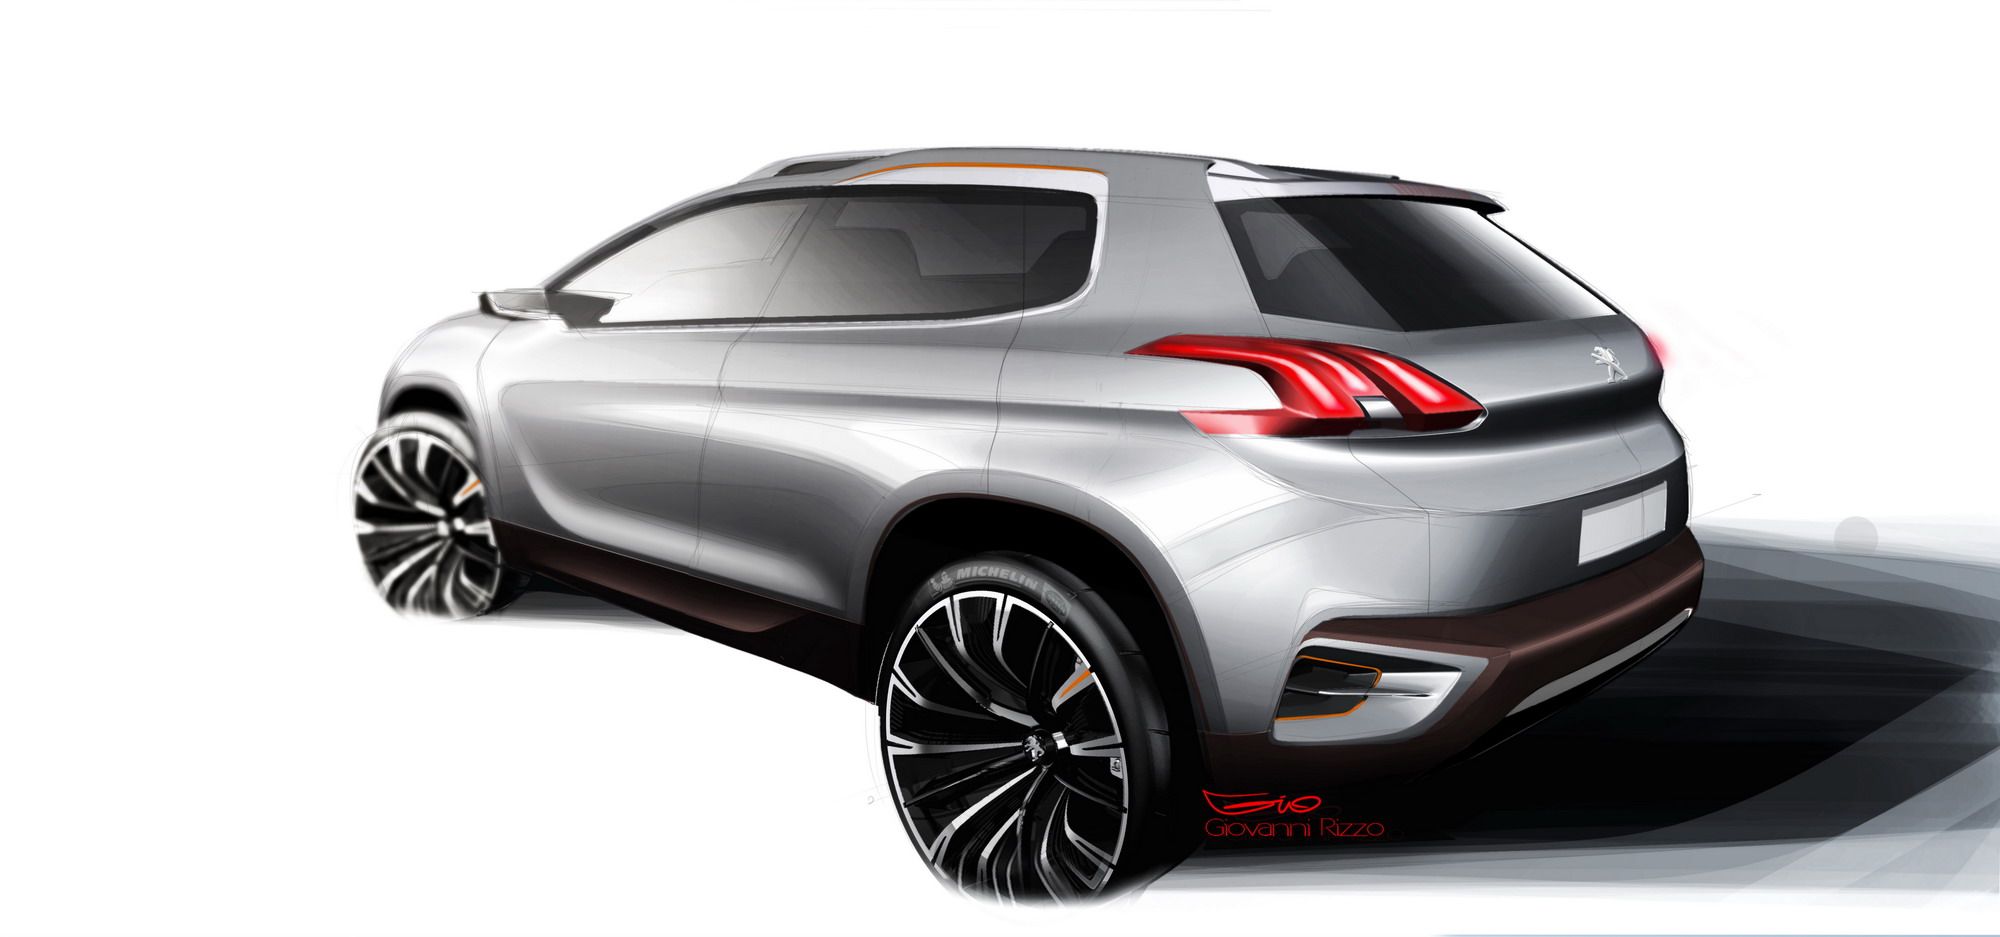 2012 Peugeot Urban Crossover Concept 